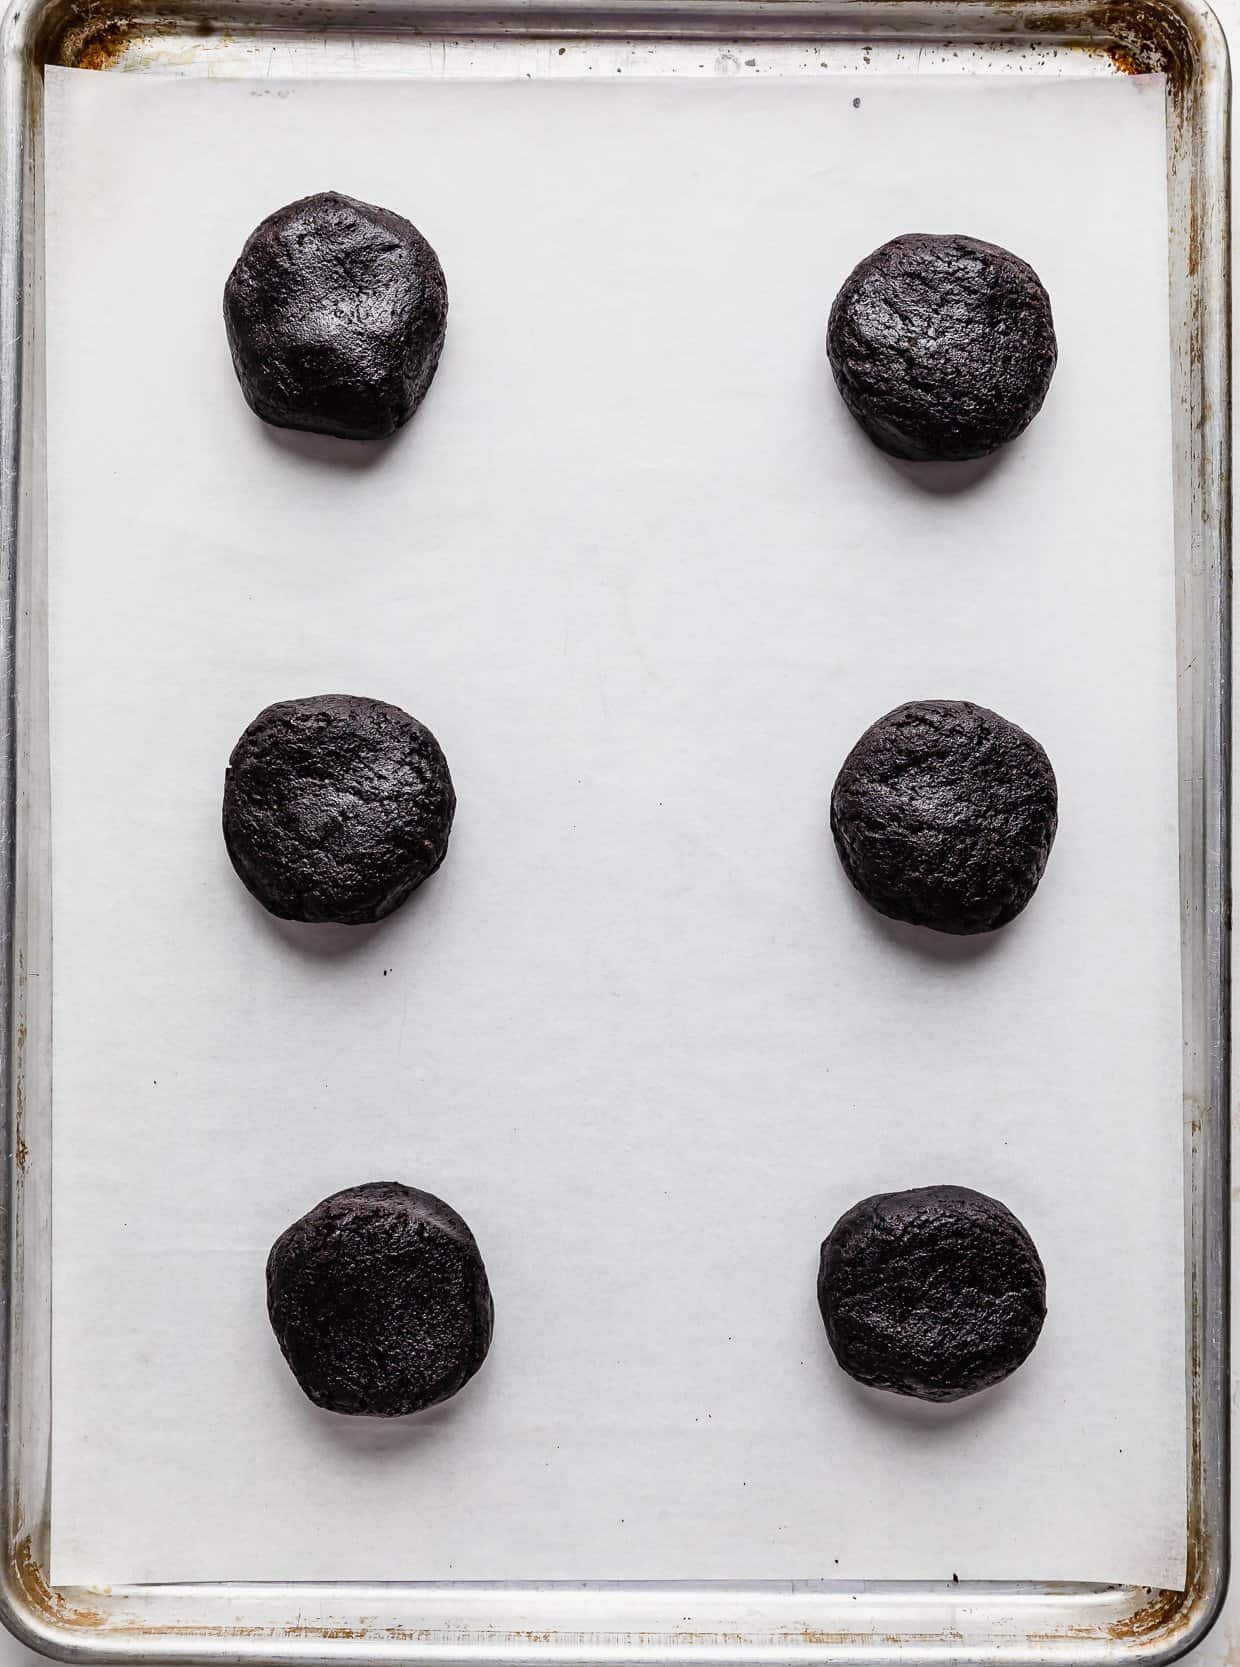 Six Oreo Birthday Cake Cookie dough balls on a white parchment paper.